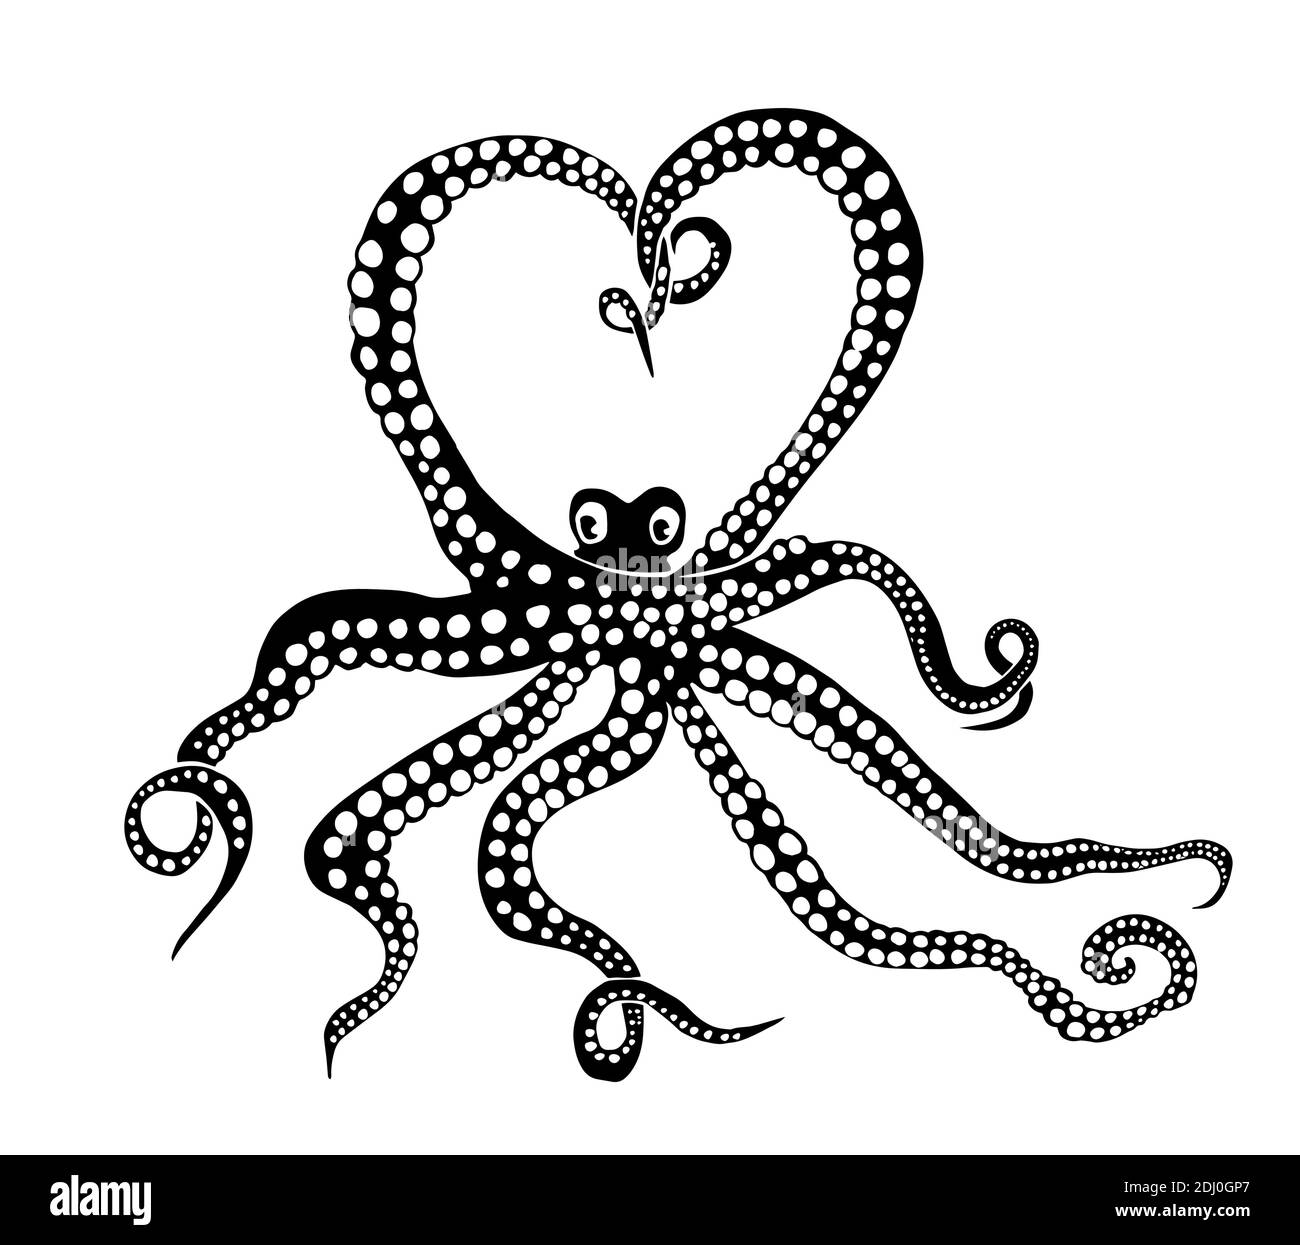 Octopus monochrome. Octopus graphic. Love. Happy Valentine's Day. The octopus makes a heart out of its tentacles . Vector illustration Stock Vector